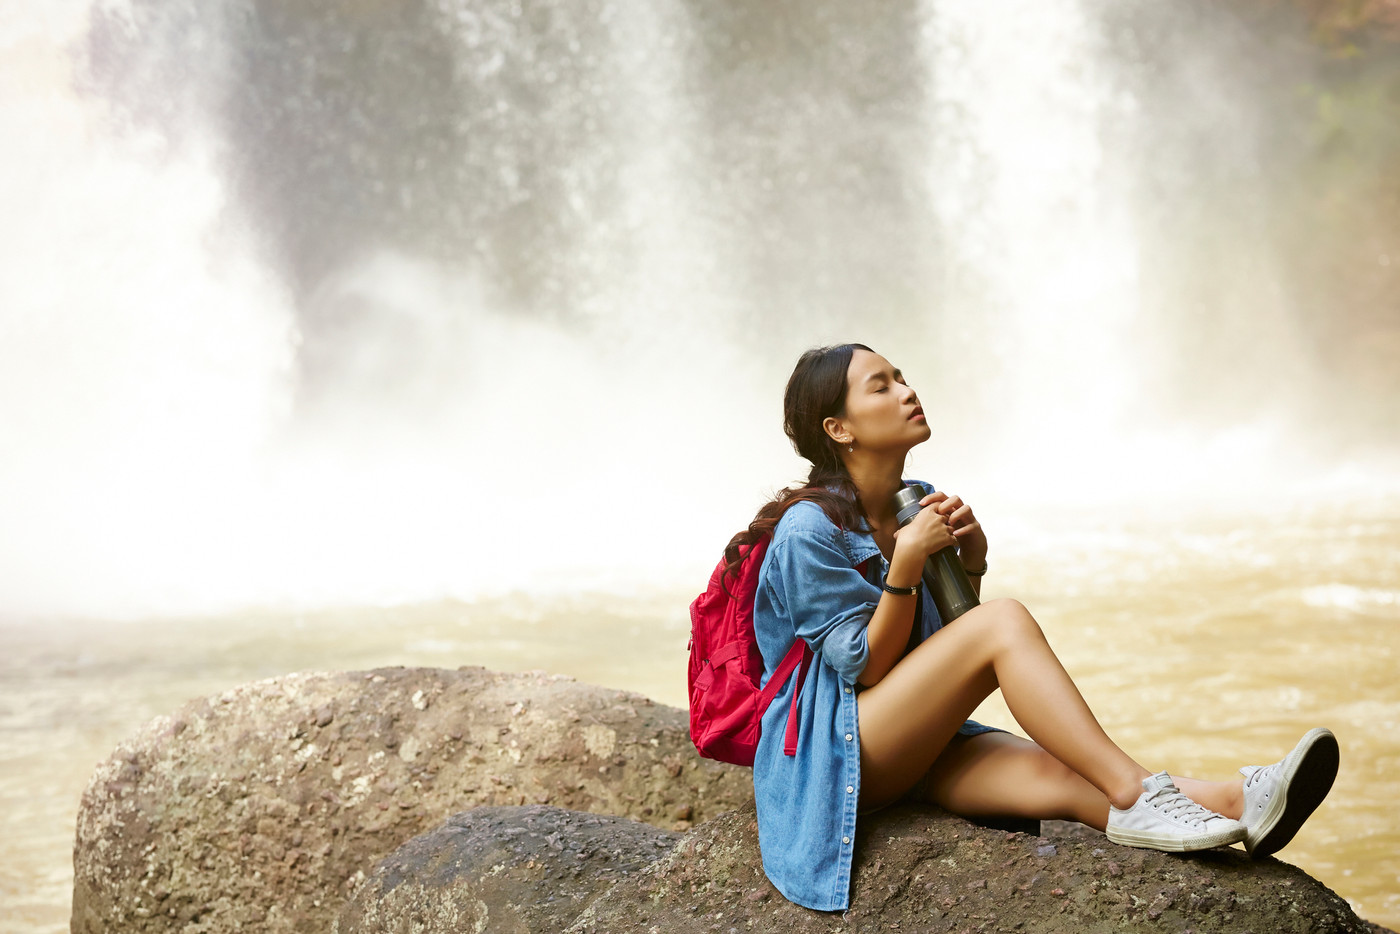 the girl with a red backpack is resting on the rock near a waterfall